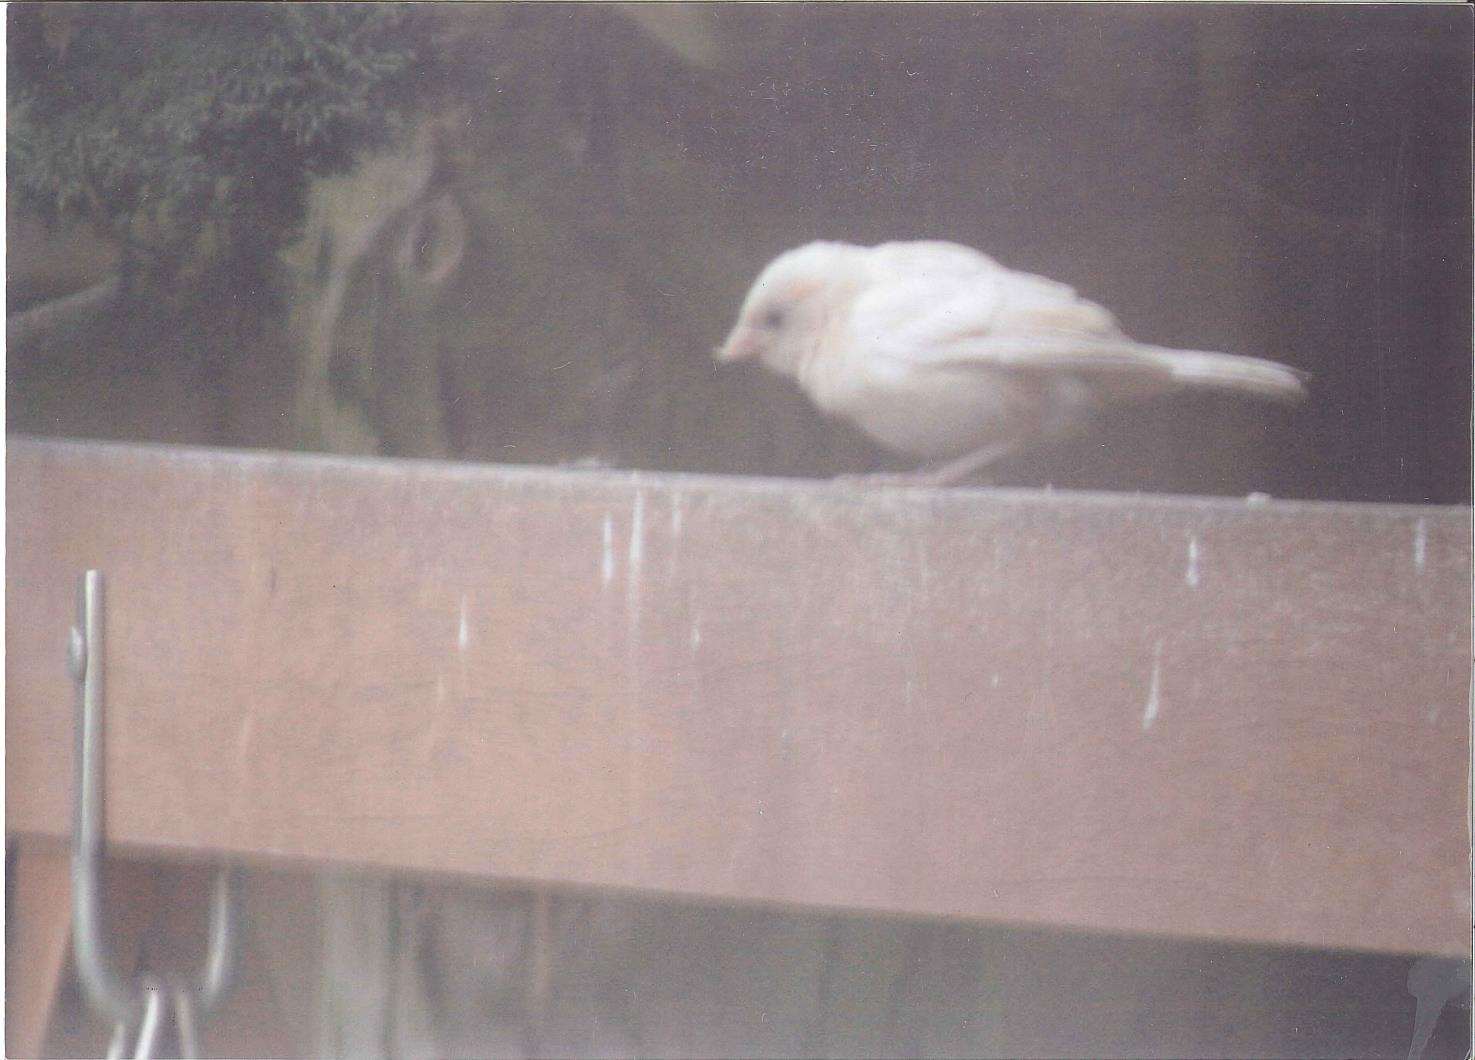 George Galdies made the news after photographing a rare albino sparrow in 2012